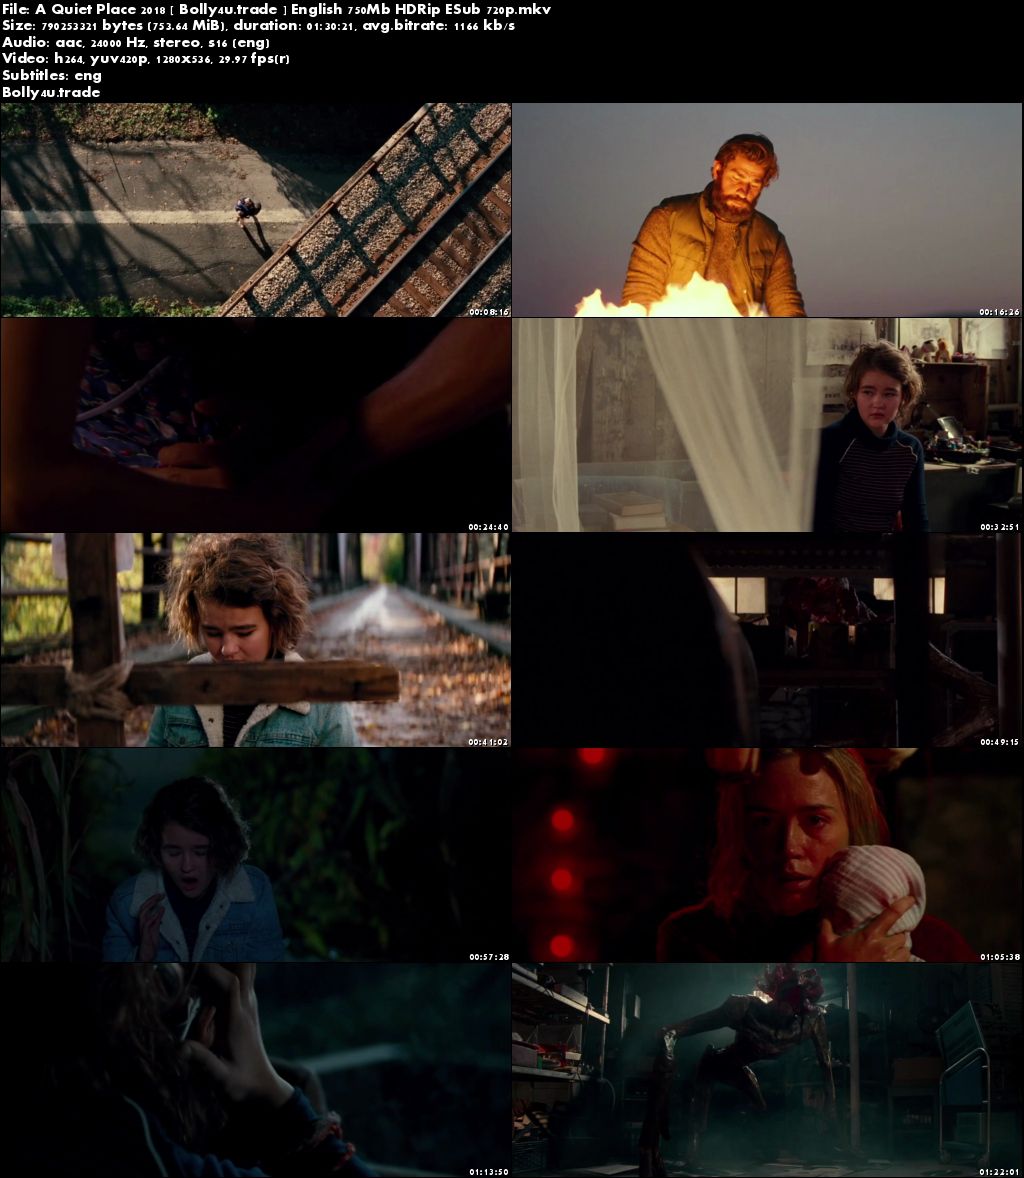 A Quiet Place 2018 HDRip 750Mb English 720p ESub Download